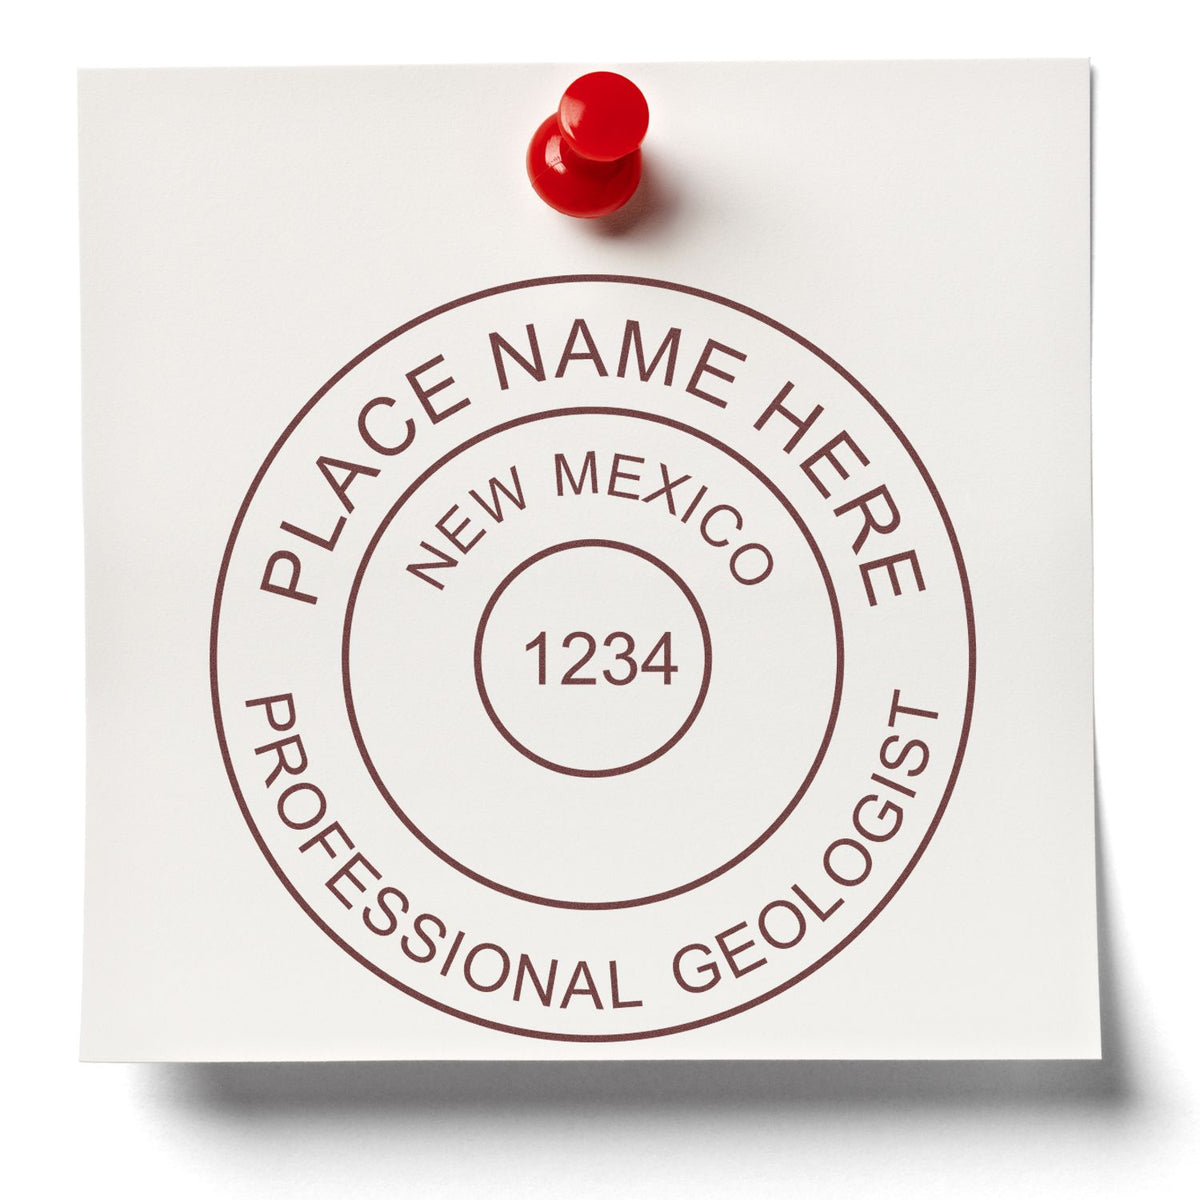 Another Example of a stamped impression of the New Mexico Professional Geologist Seal Stamp on a office form